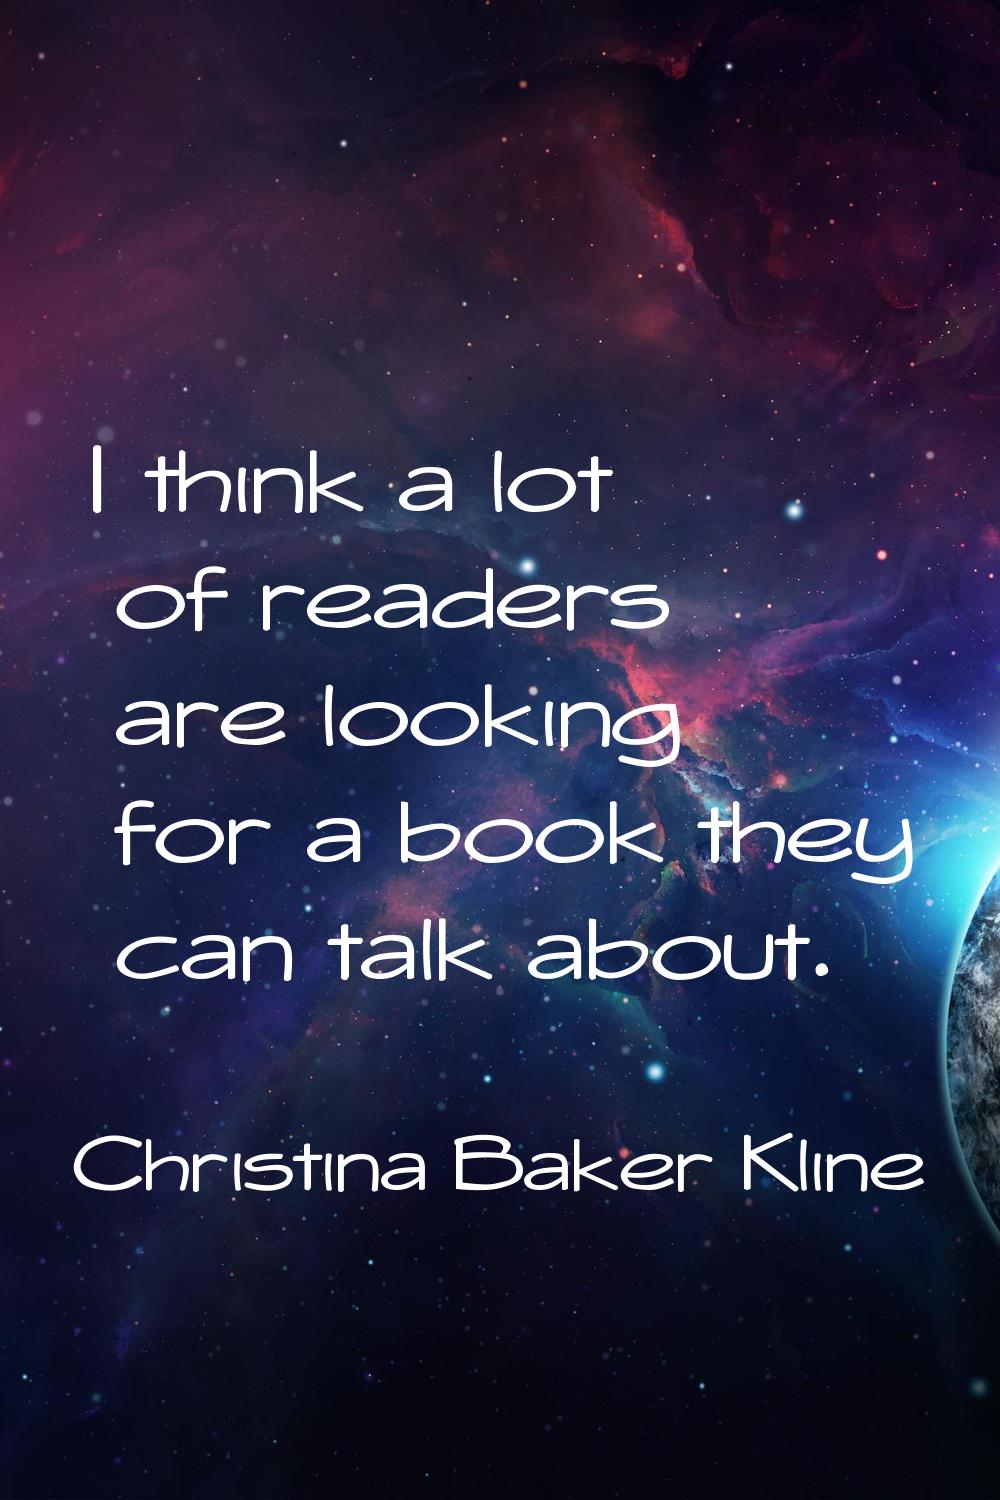 I think a lot of readers are looking for a book they can talk about.